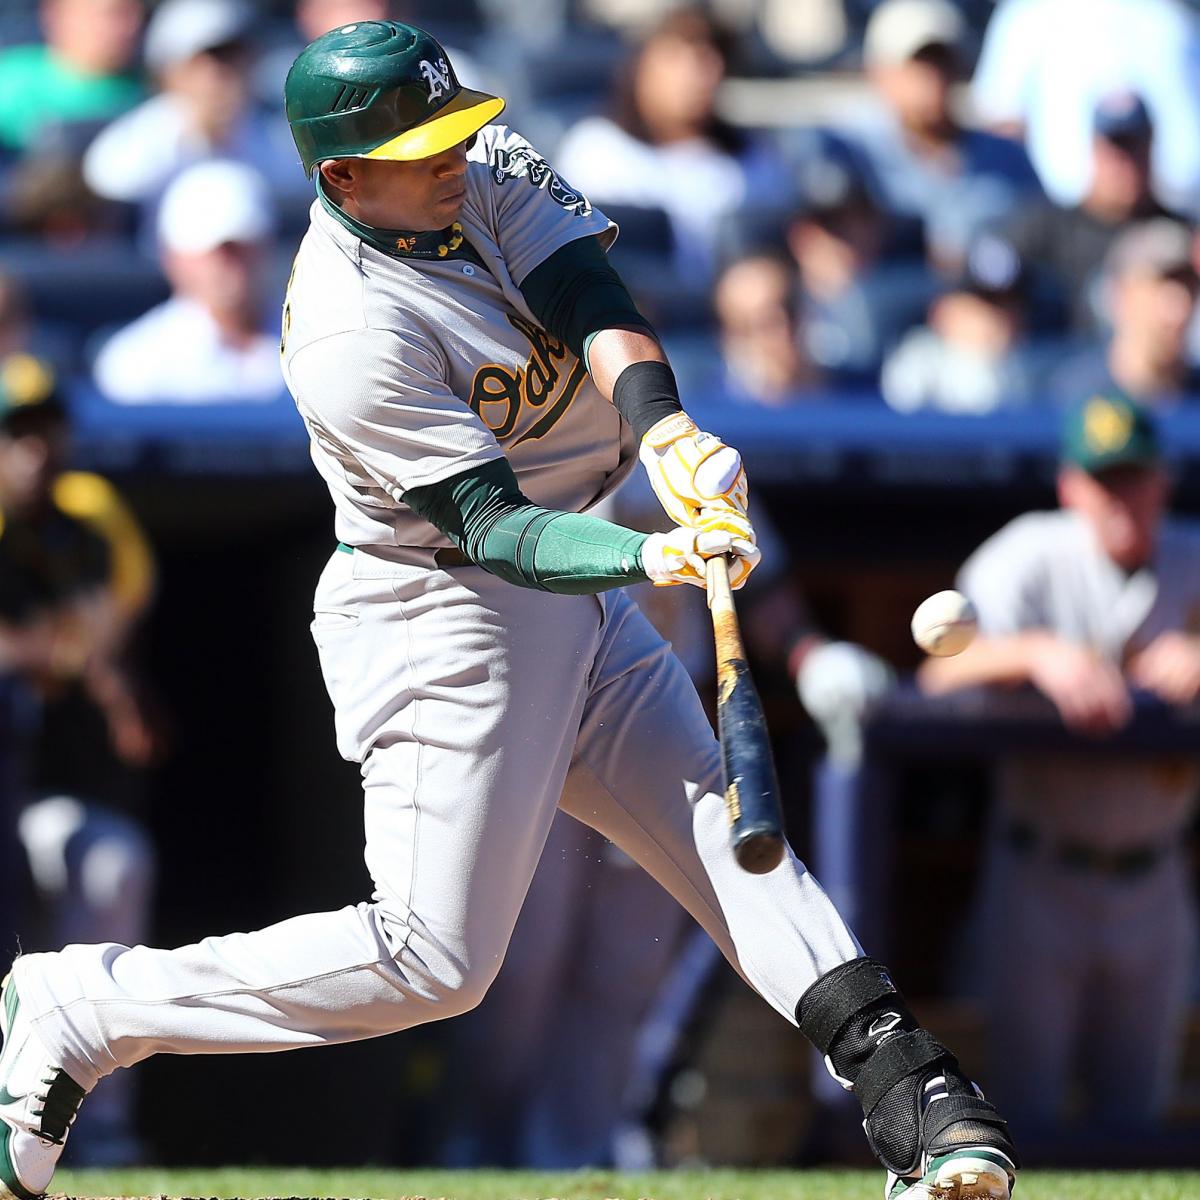 Wild Card Game: Oakland A's can't break October slump, fall 6-2 to